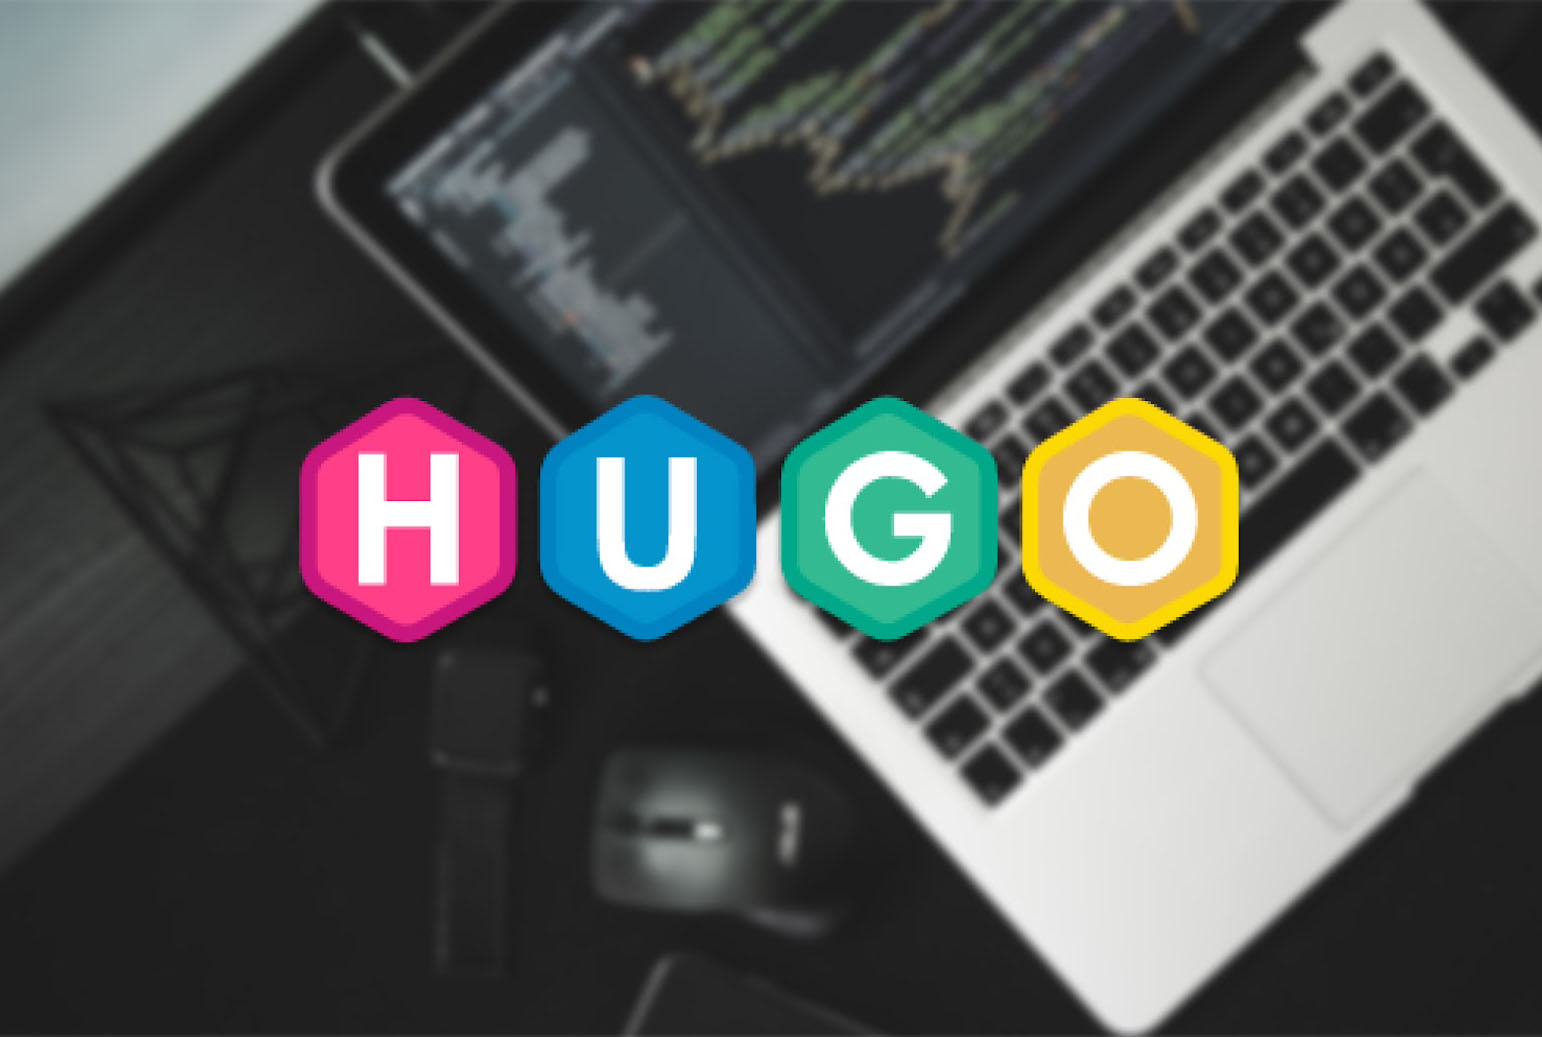 Hugo logo with a computer with code on screen in the background